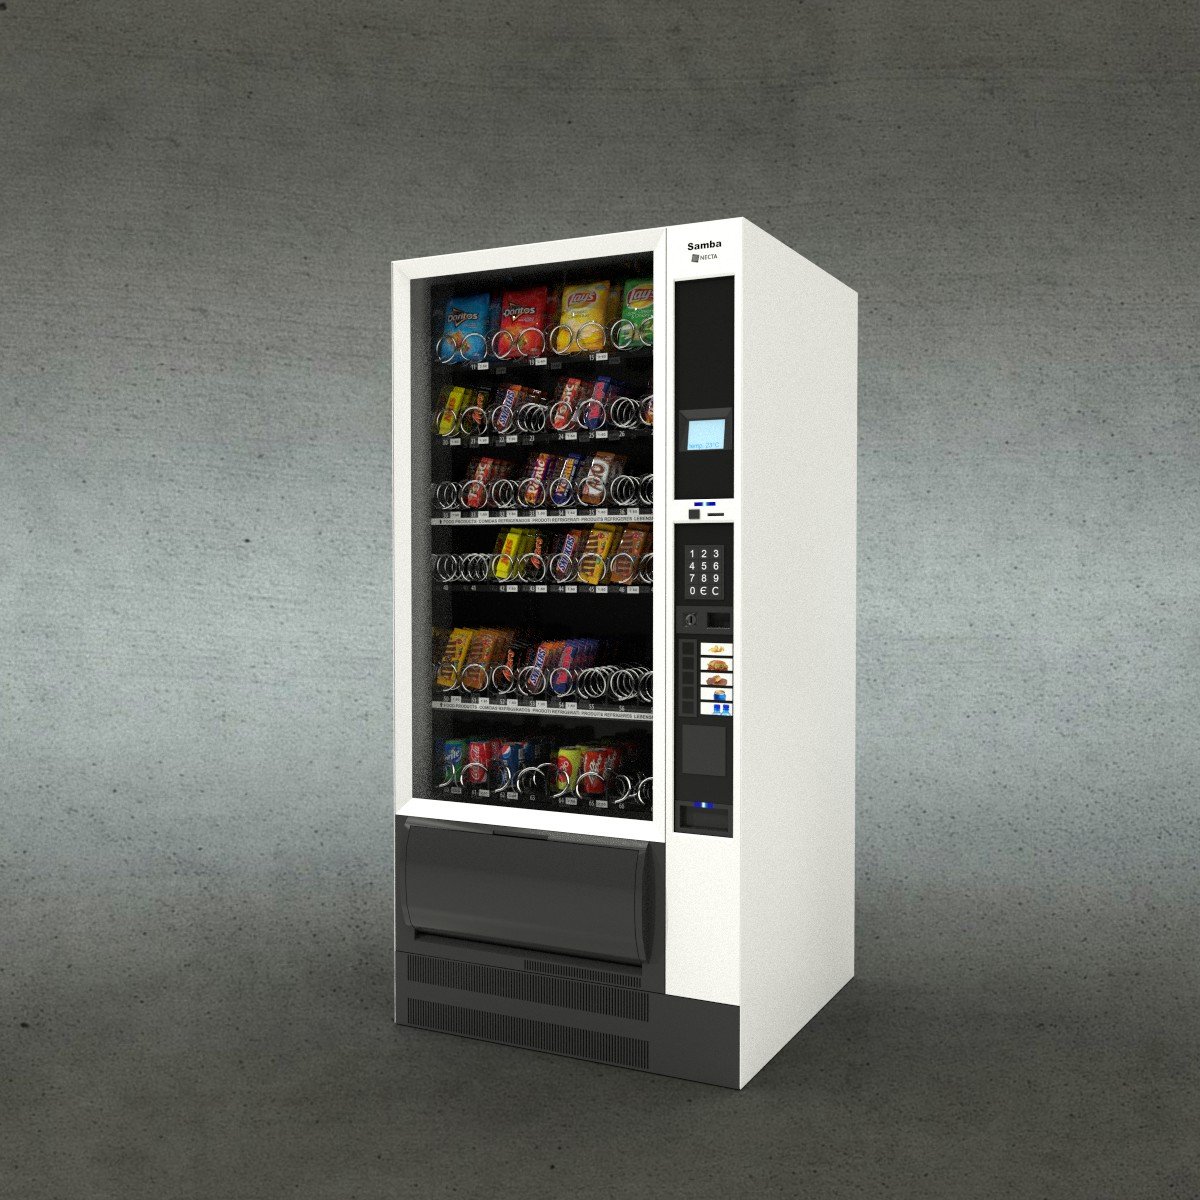 Best Vending Machines To Own 2020